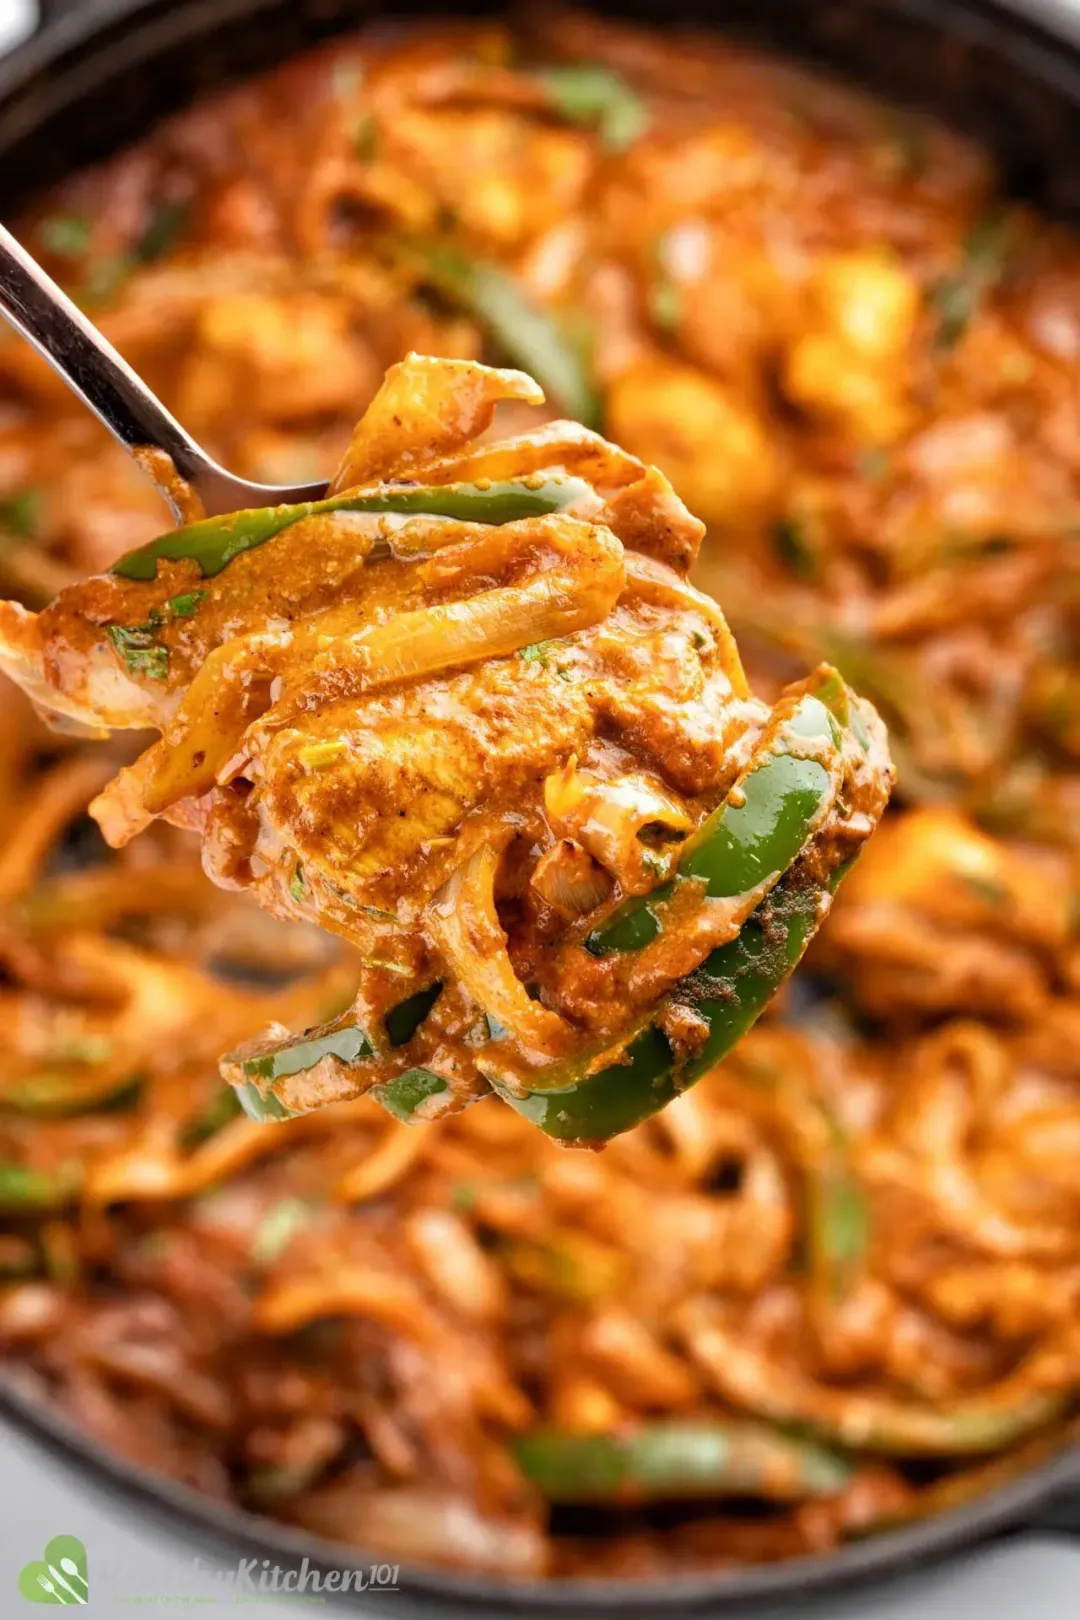 A fork picking up vegetable matchsticks covered in a Tikka Masala sauce